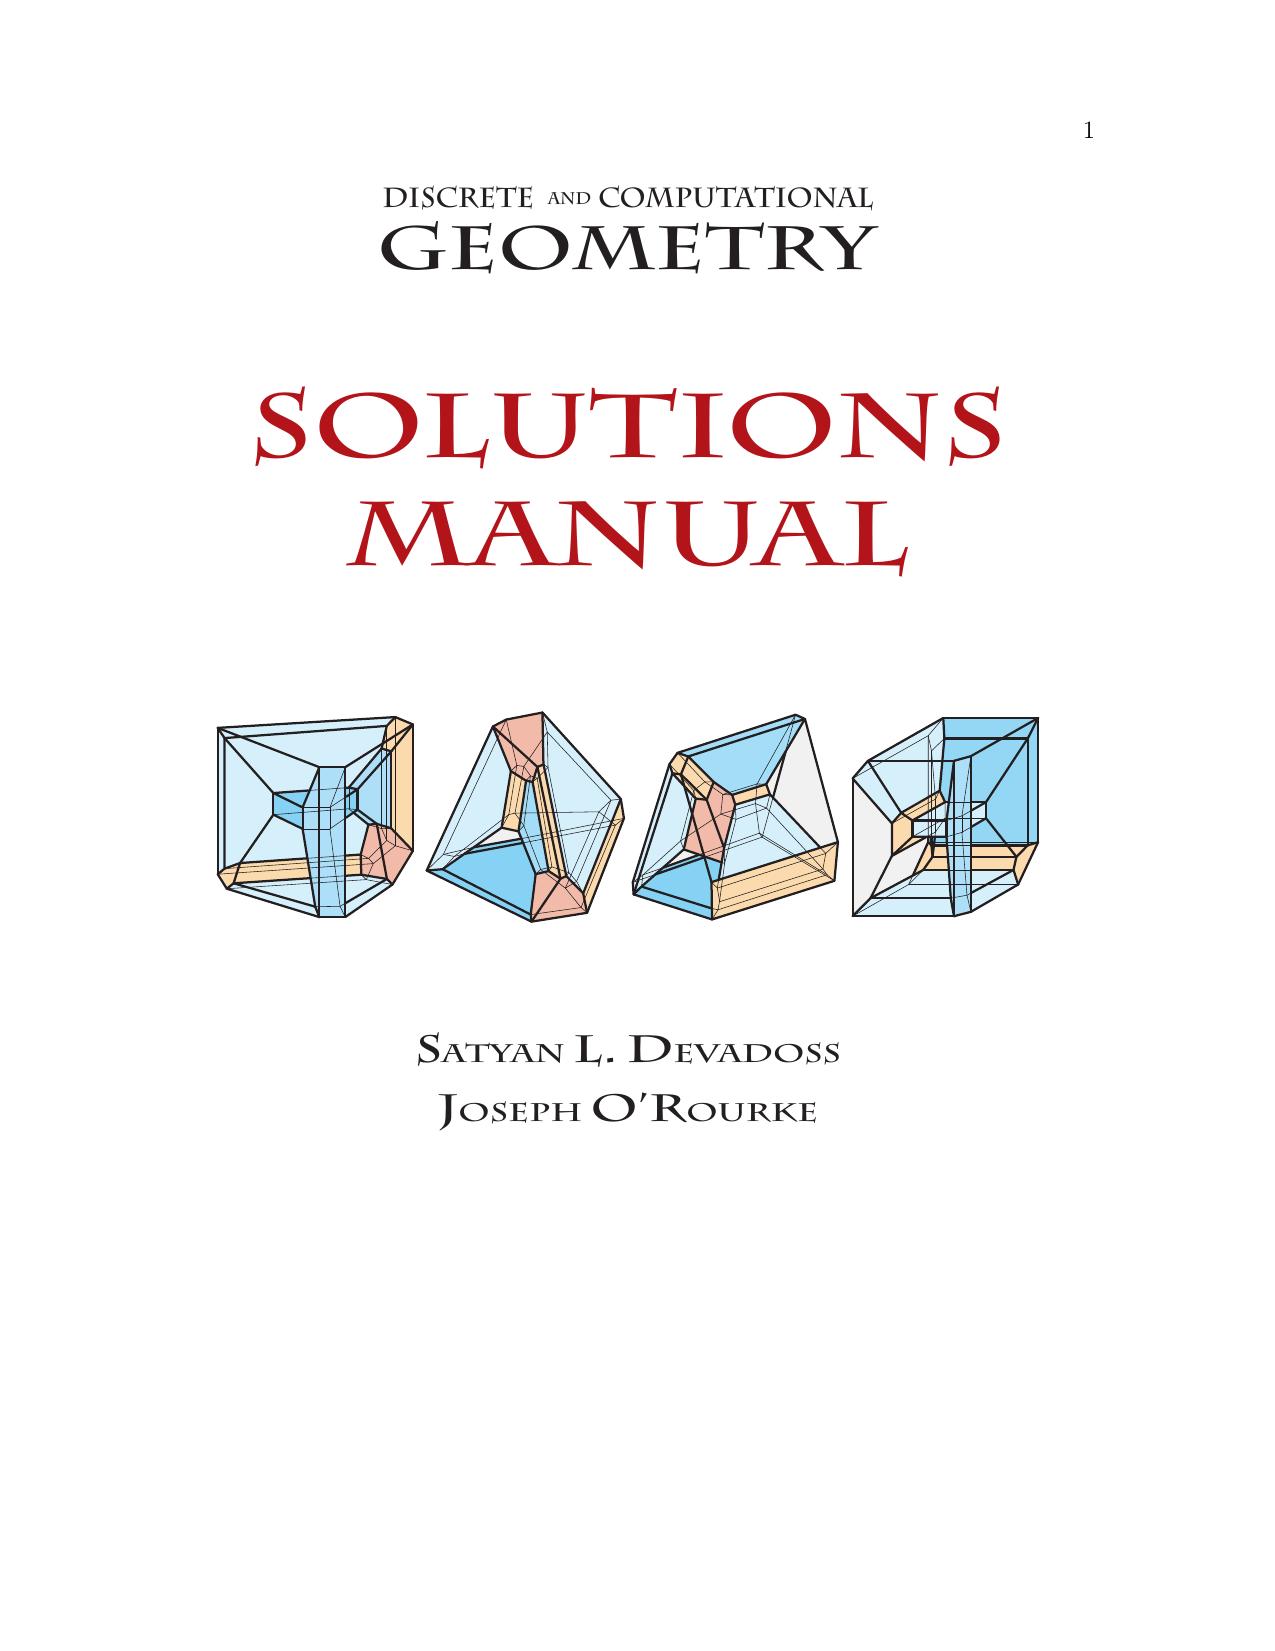 Discrete and Computational Geometry (Instructor Solution Manual, Solutions) by Satyan L. Devadoss Joseph O'Rourke